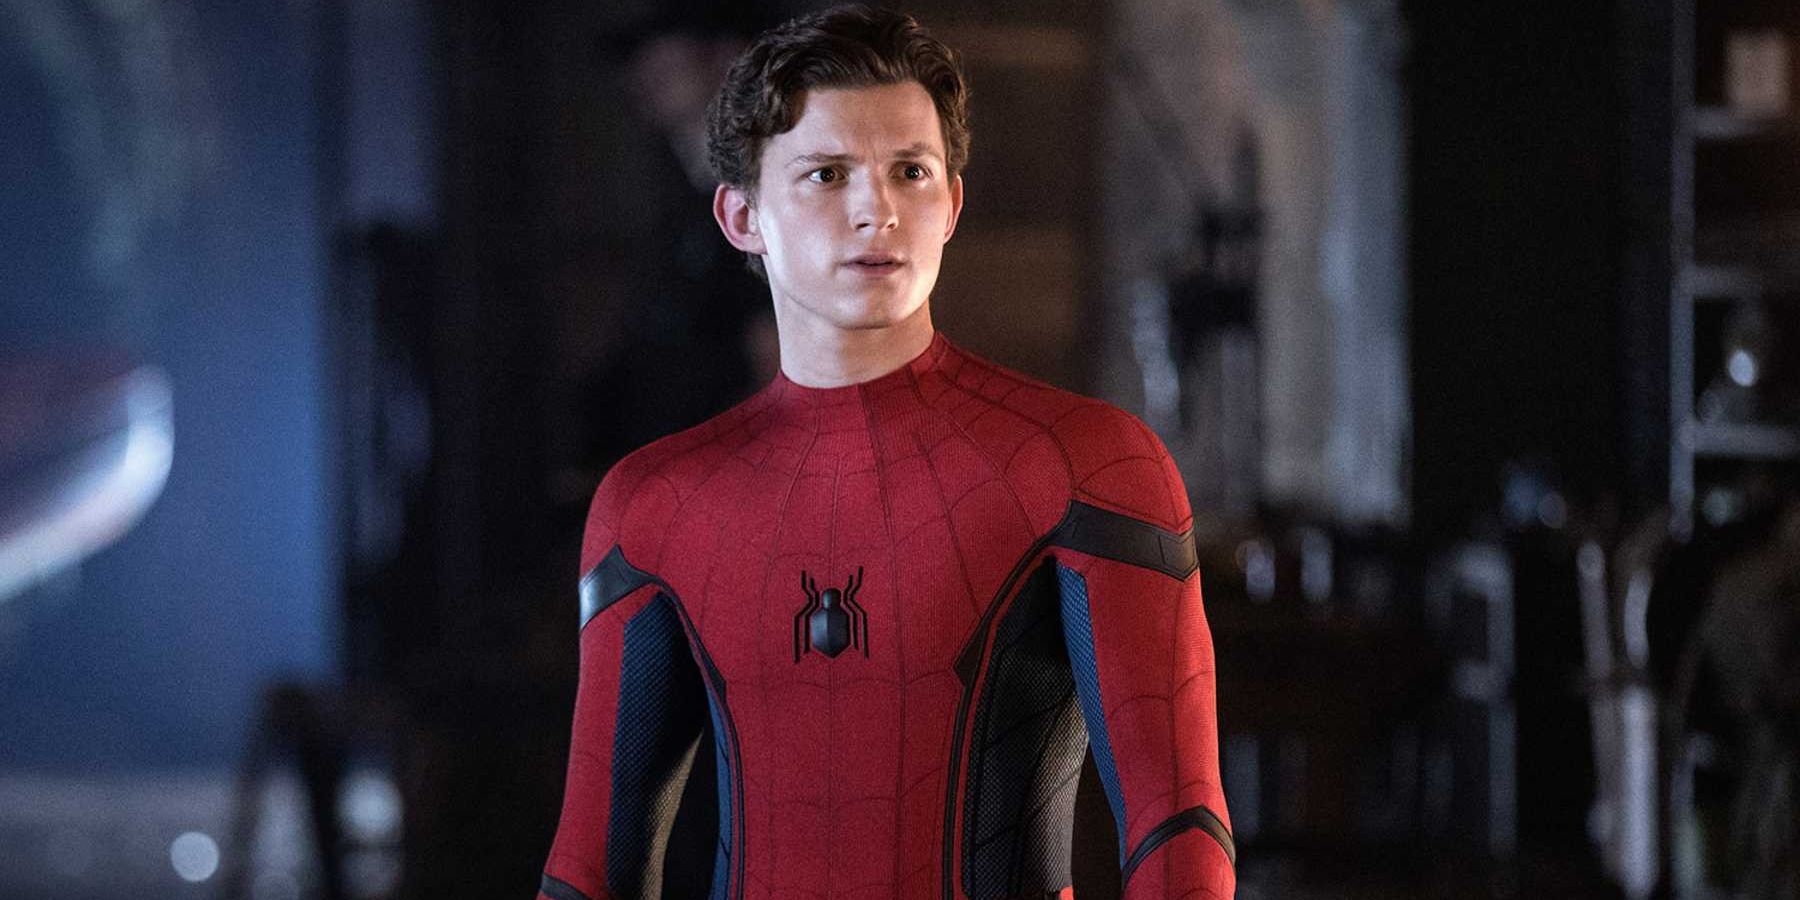 Tom Holland will return in three more Spider-Man films, says Sony exec